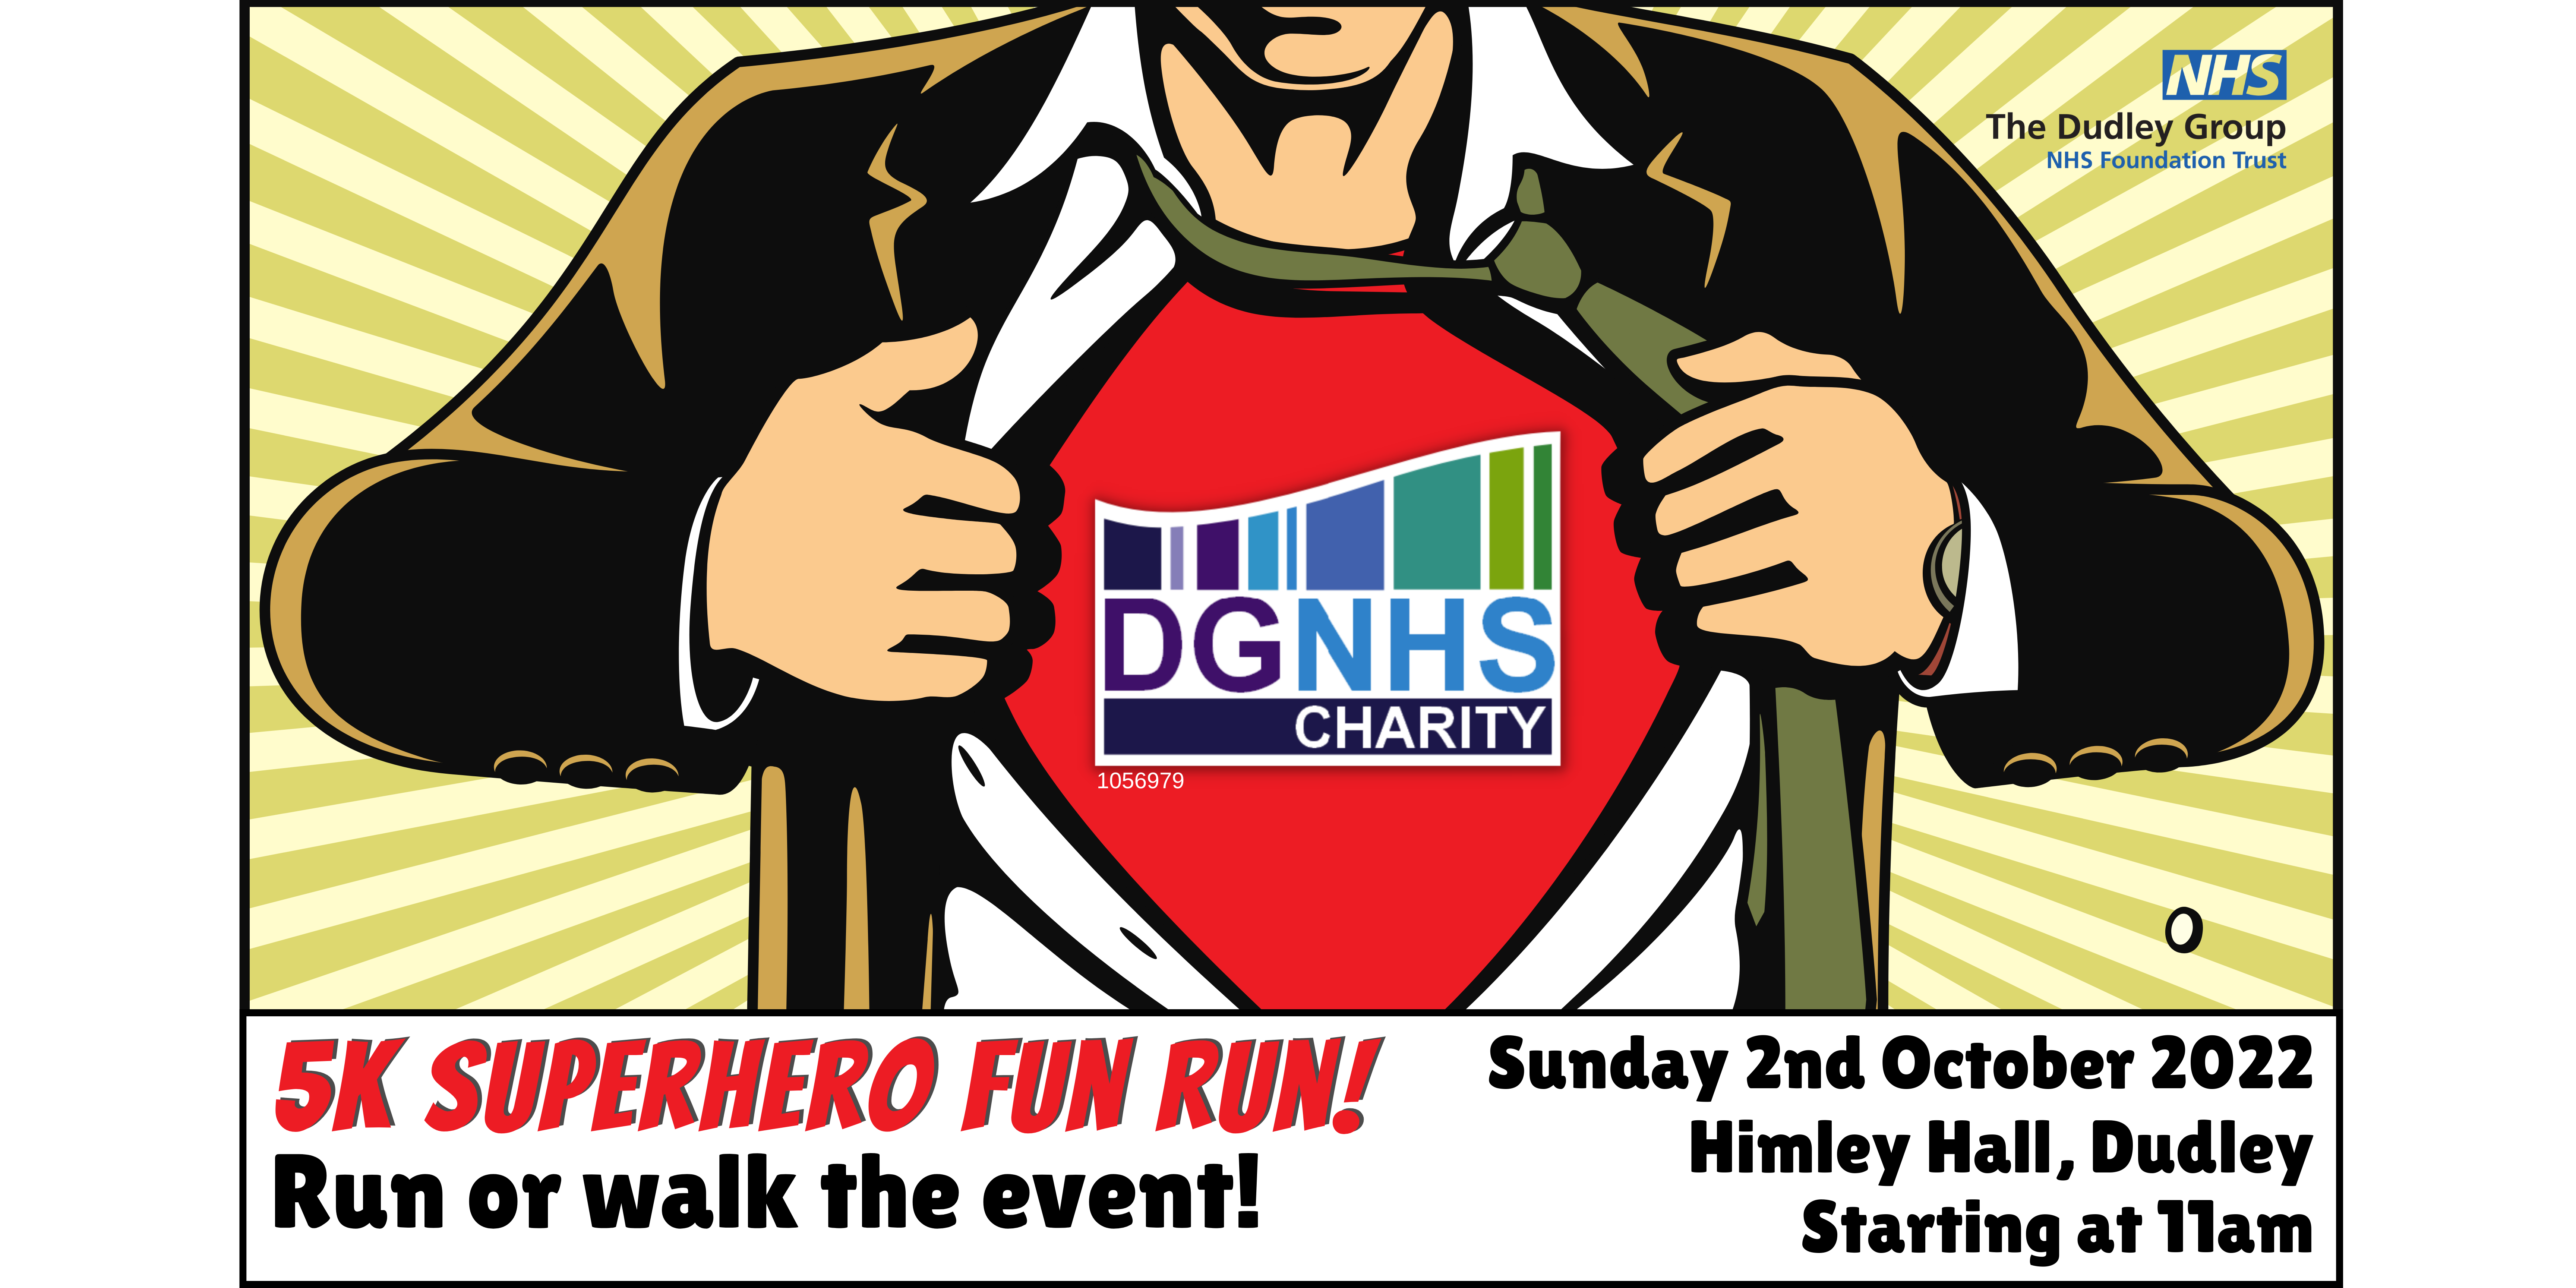 Image for The Dudley Group NHS Charity announce their upcoming Superhero Fun Run.